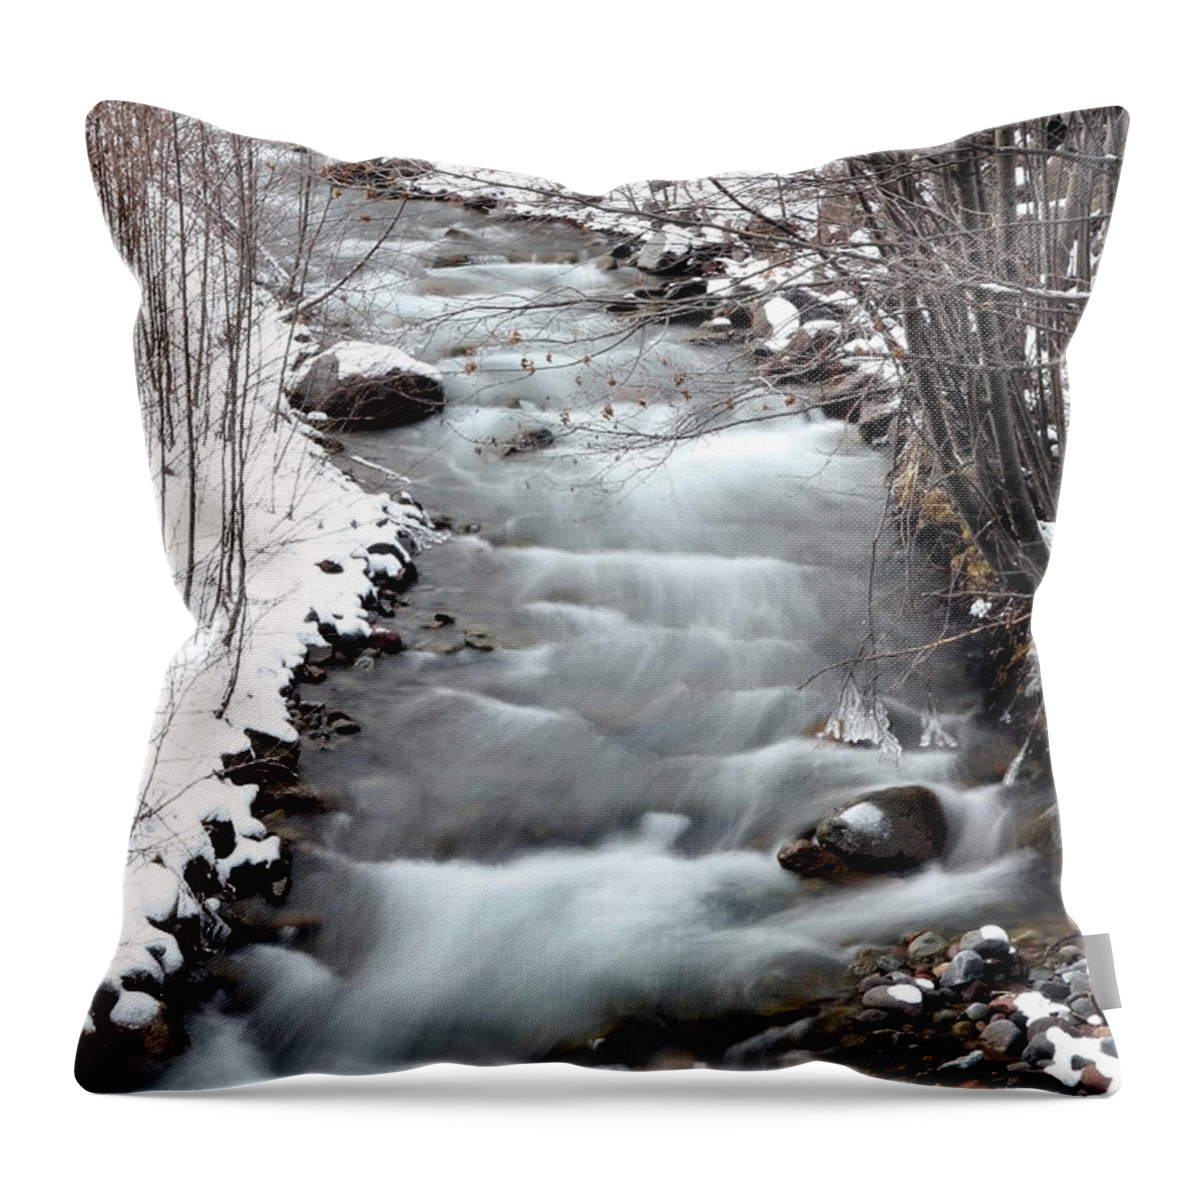 Mount Hood Waterfall Throw Pillow featuring the photograph Snowy River at Mt. Hood by Athena Mckinzie